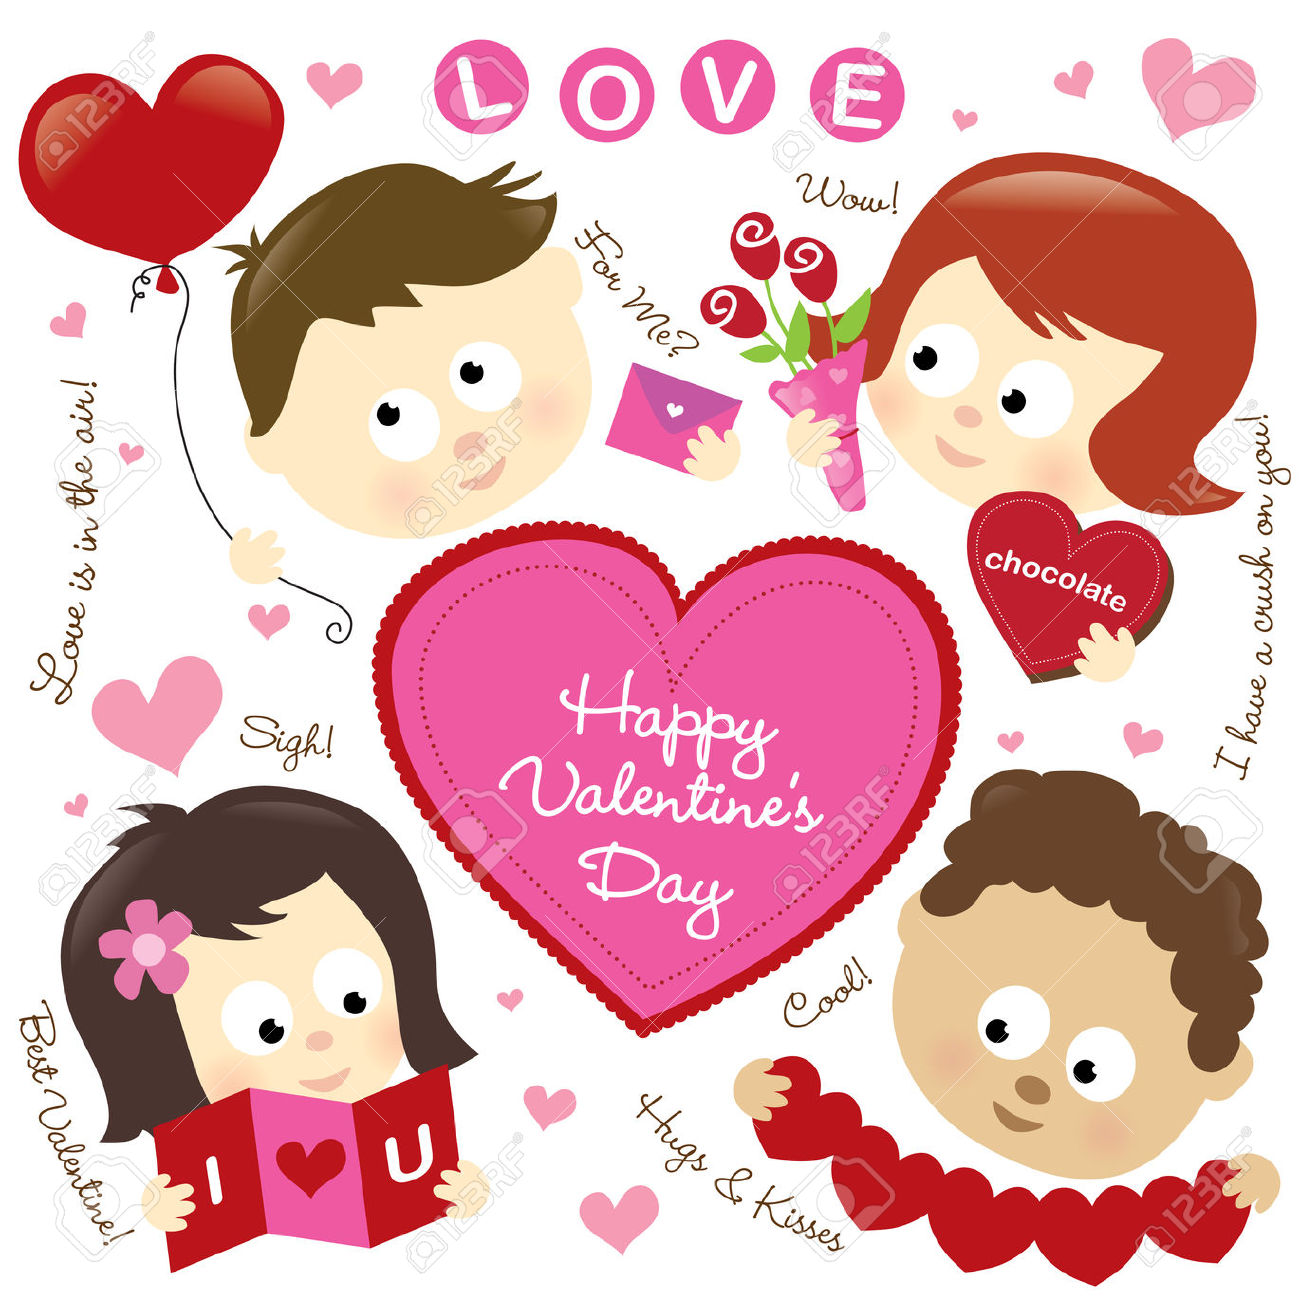 valentine's day banners clipart - photo #35